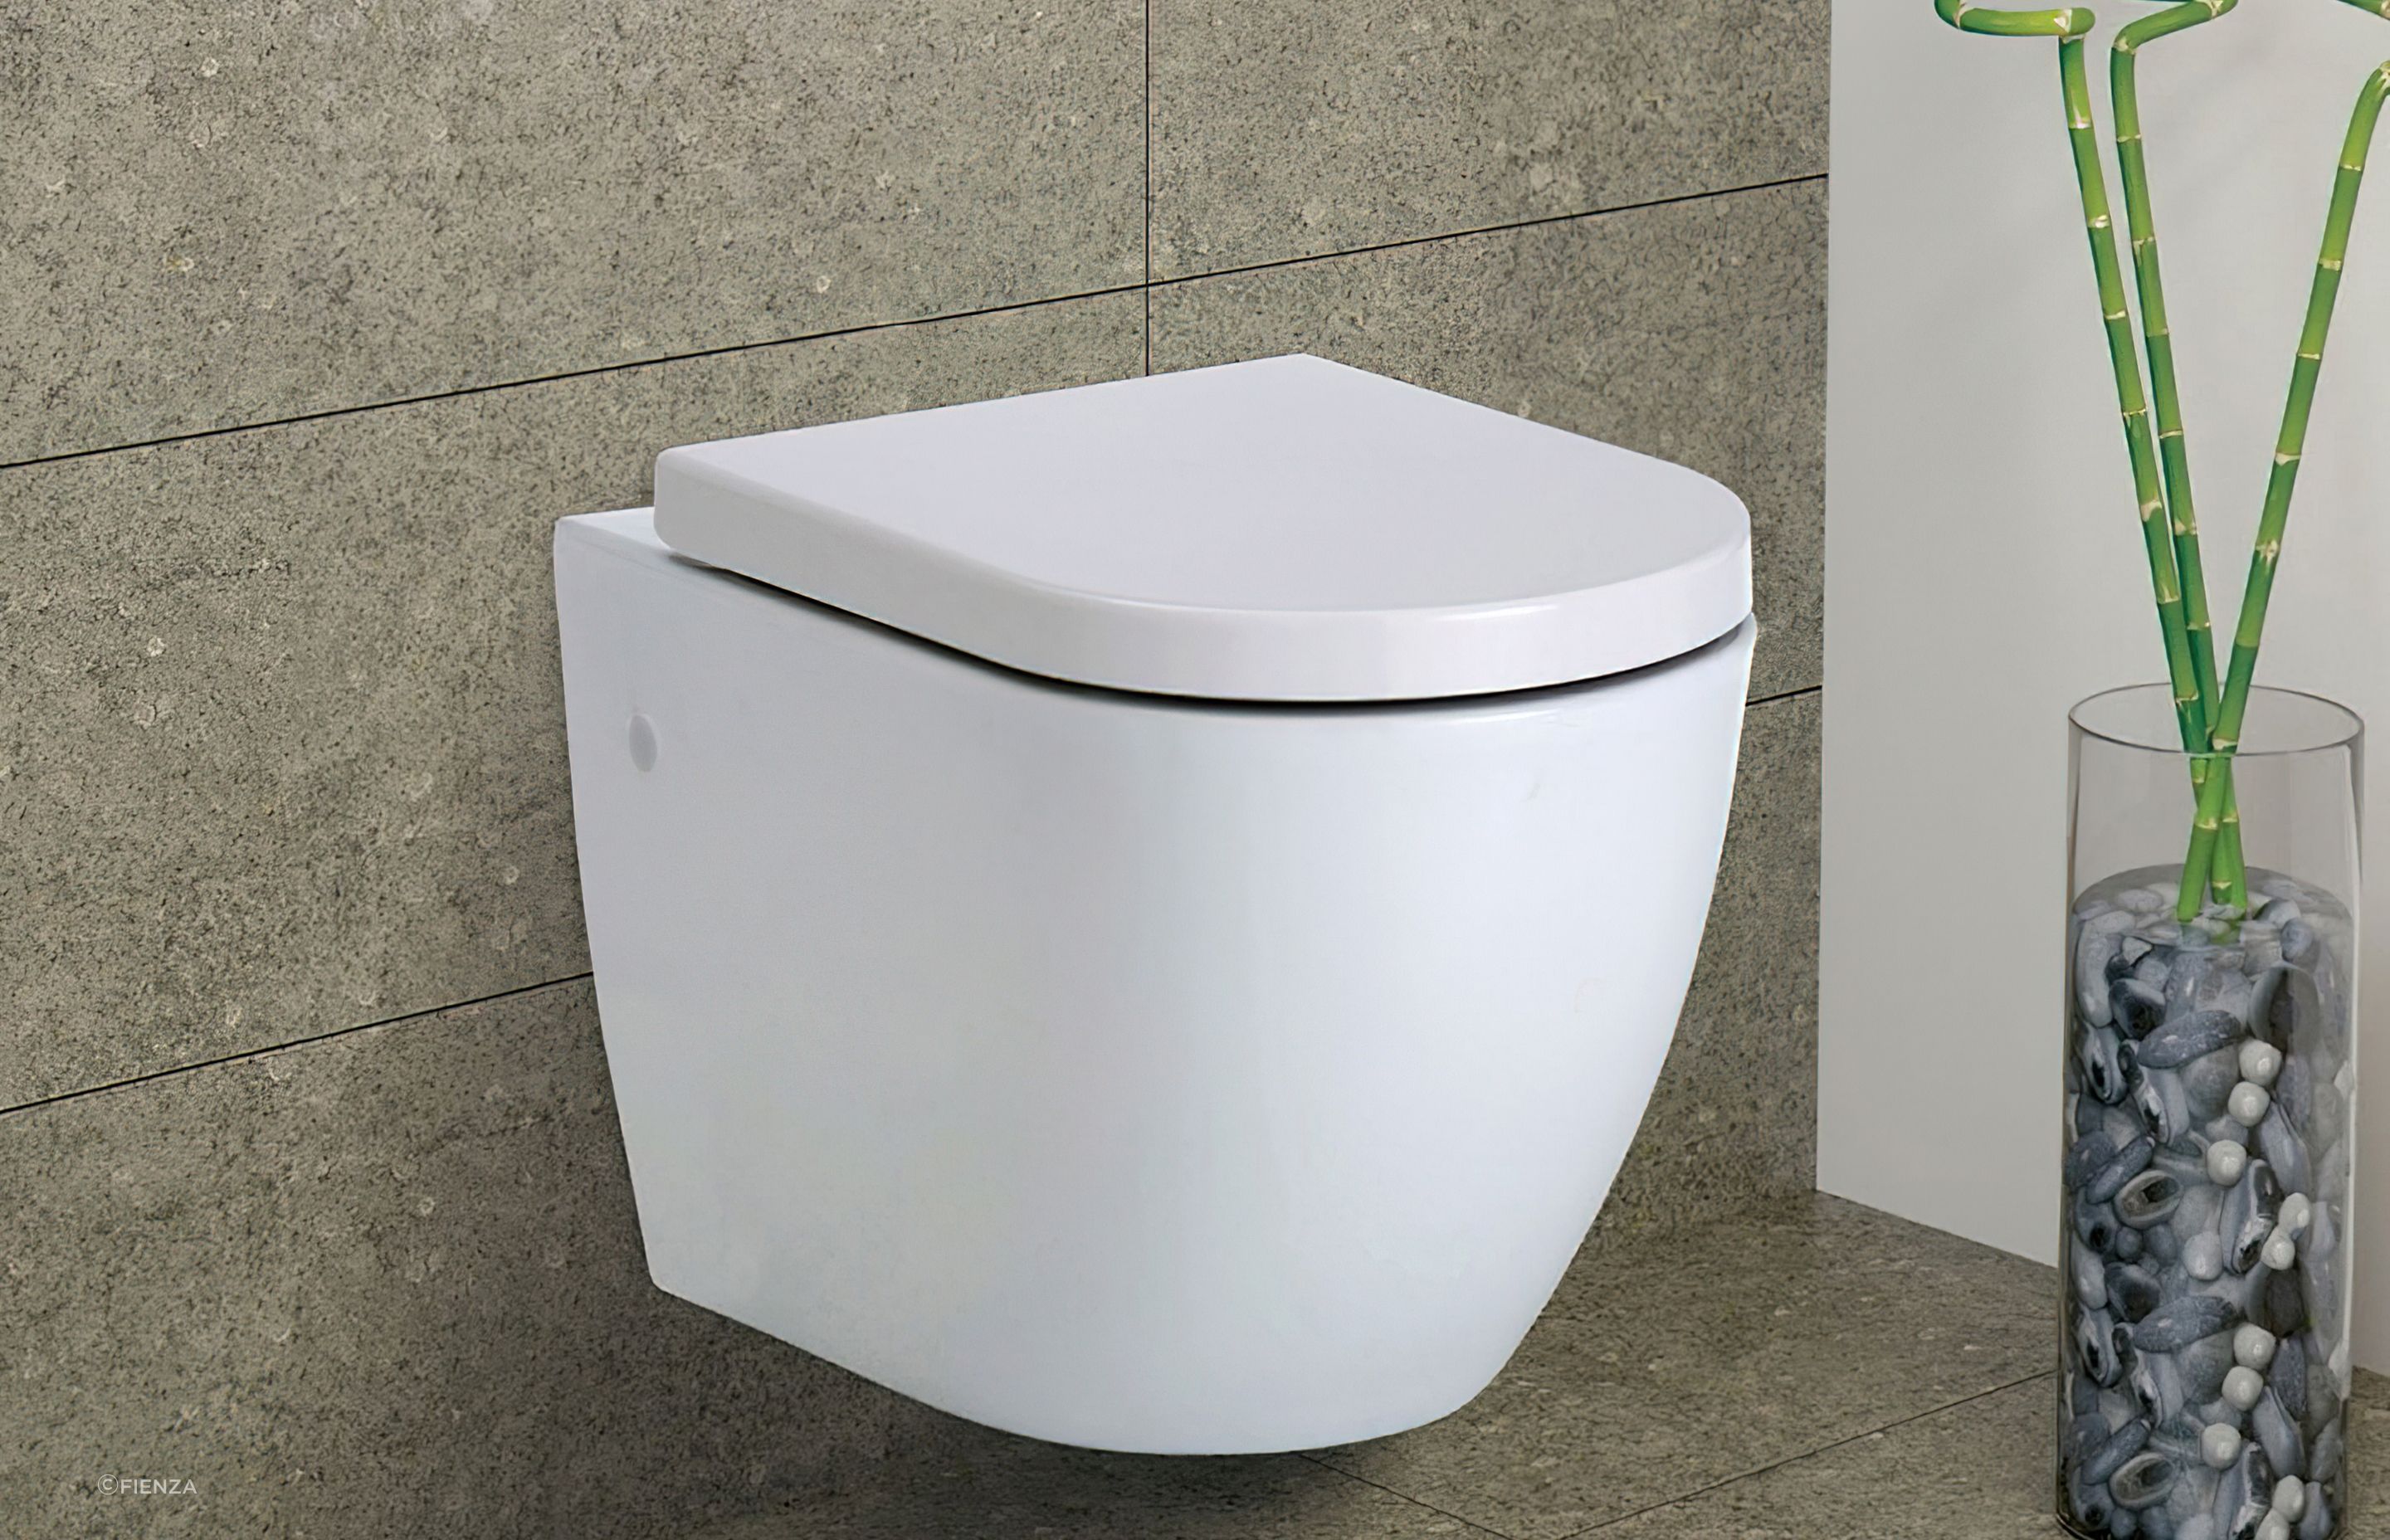 Wall-hung toilets feature a sleek and minimalist design, perfect for bathrooms where space is at a premium.